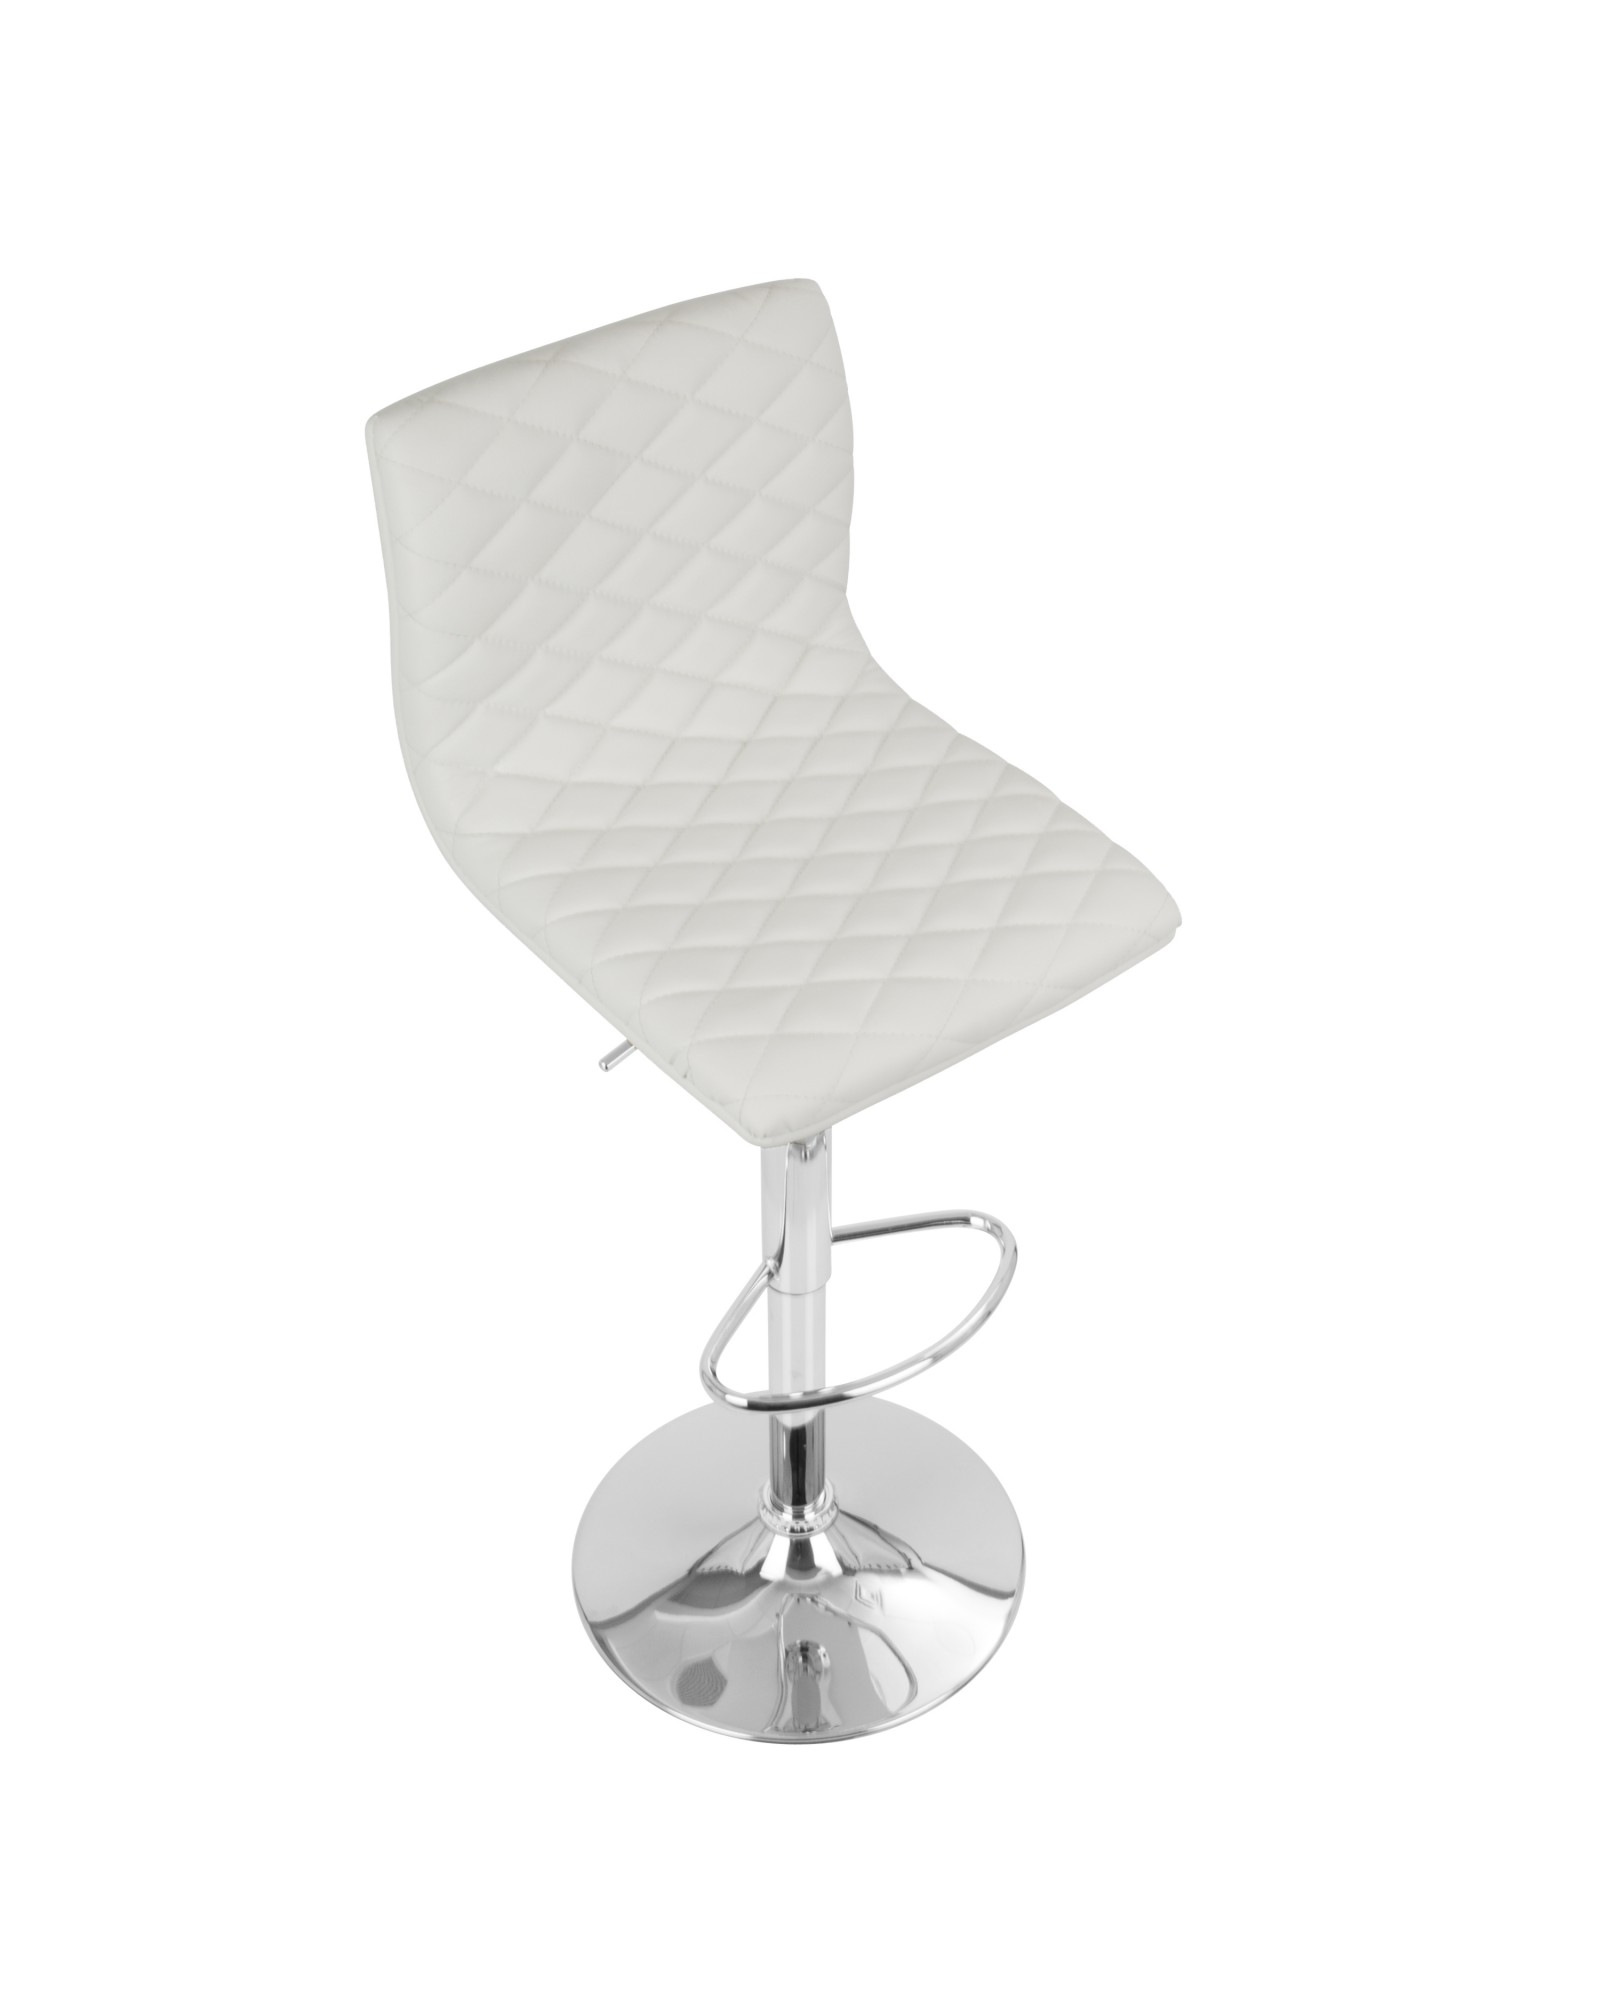 Caviar Contemporary Adjustable Barstool with Swivel in White Faux Leather